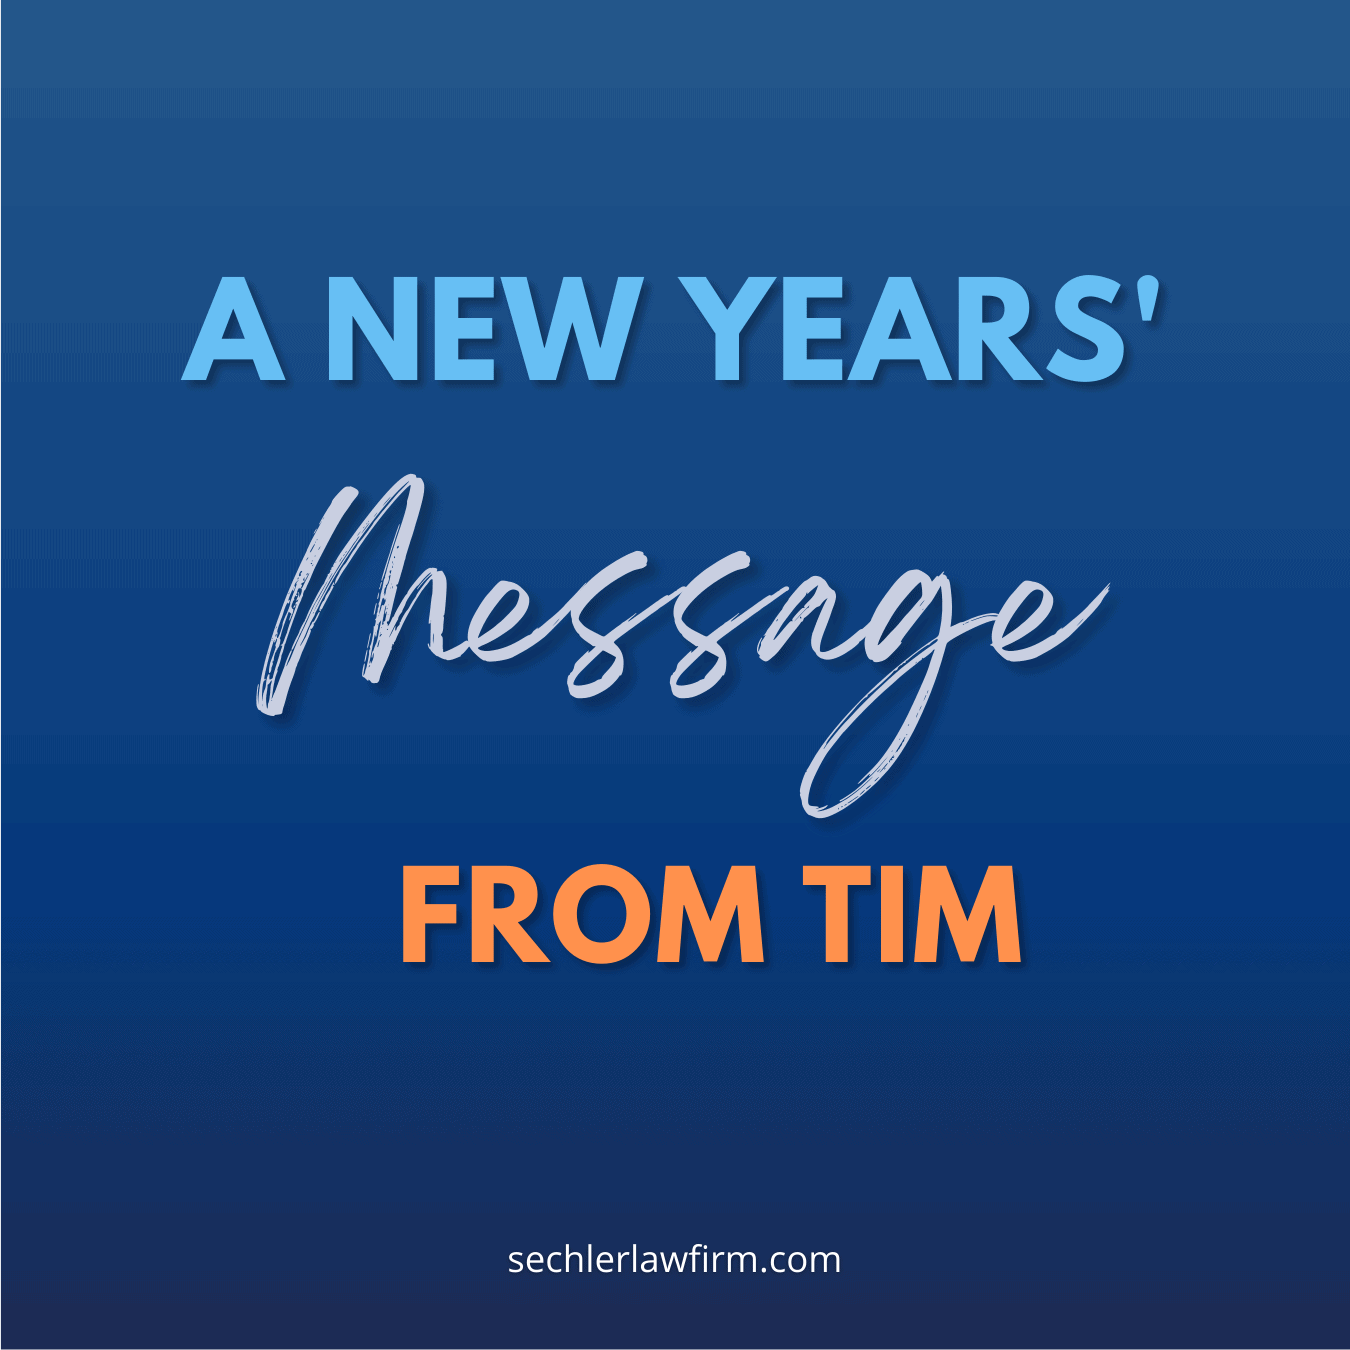 New Years’ Message from Tim